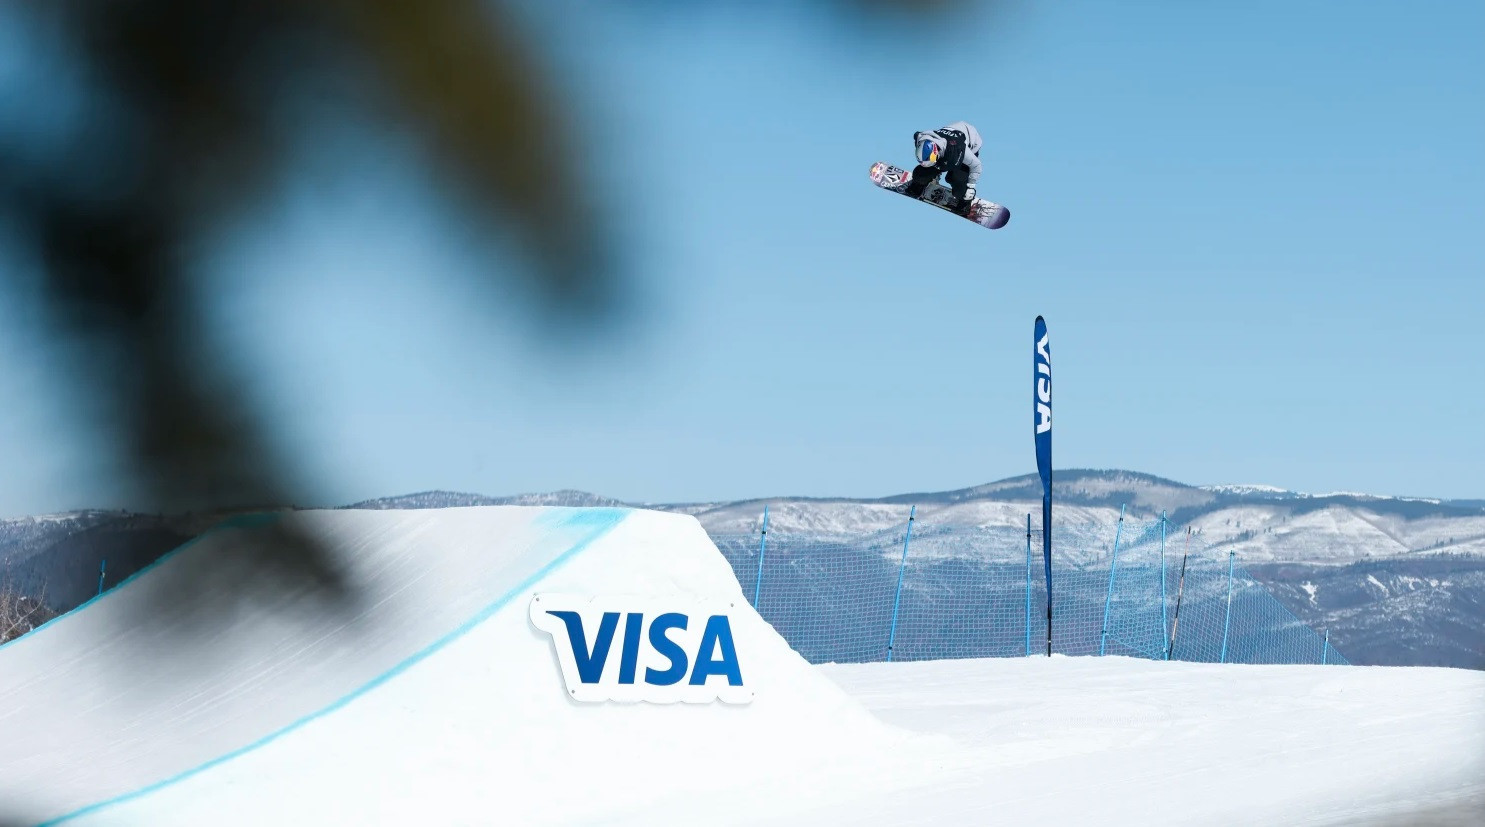 Big Air World Cup event at Steamboat given go-ahead by FIS after positive snow report